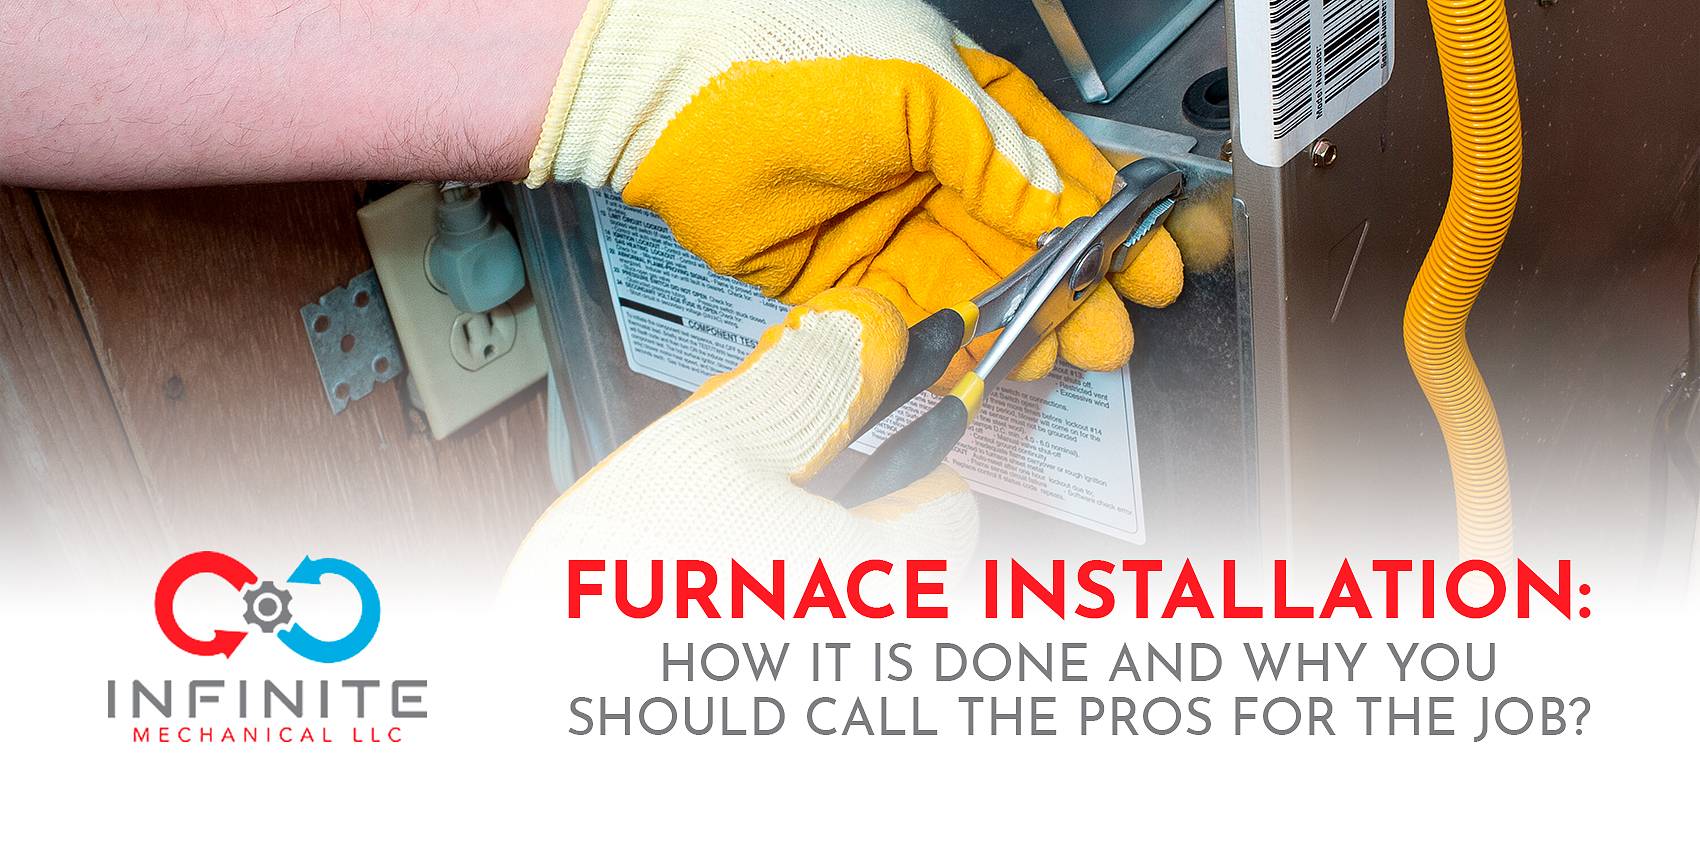 Furnace Installation: How It Is Done and Why You Should Call the Pros for the Job?